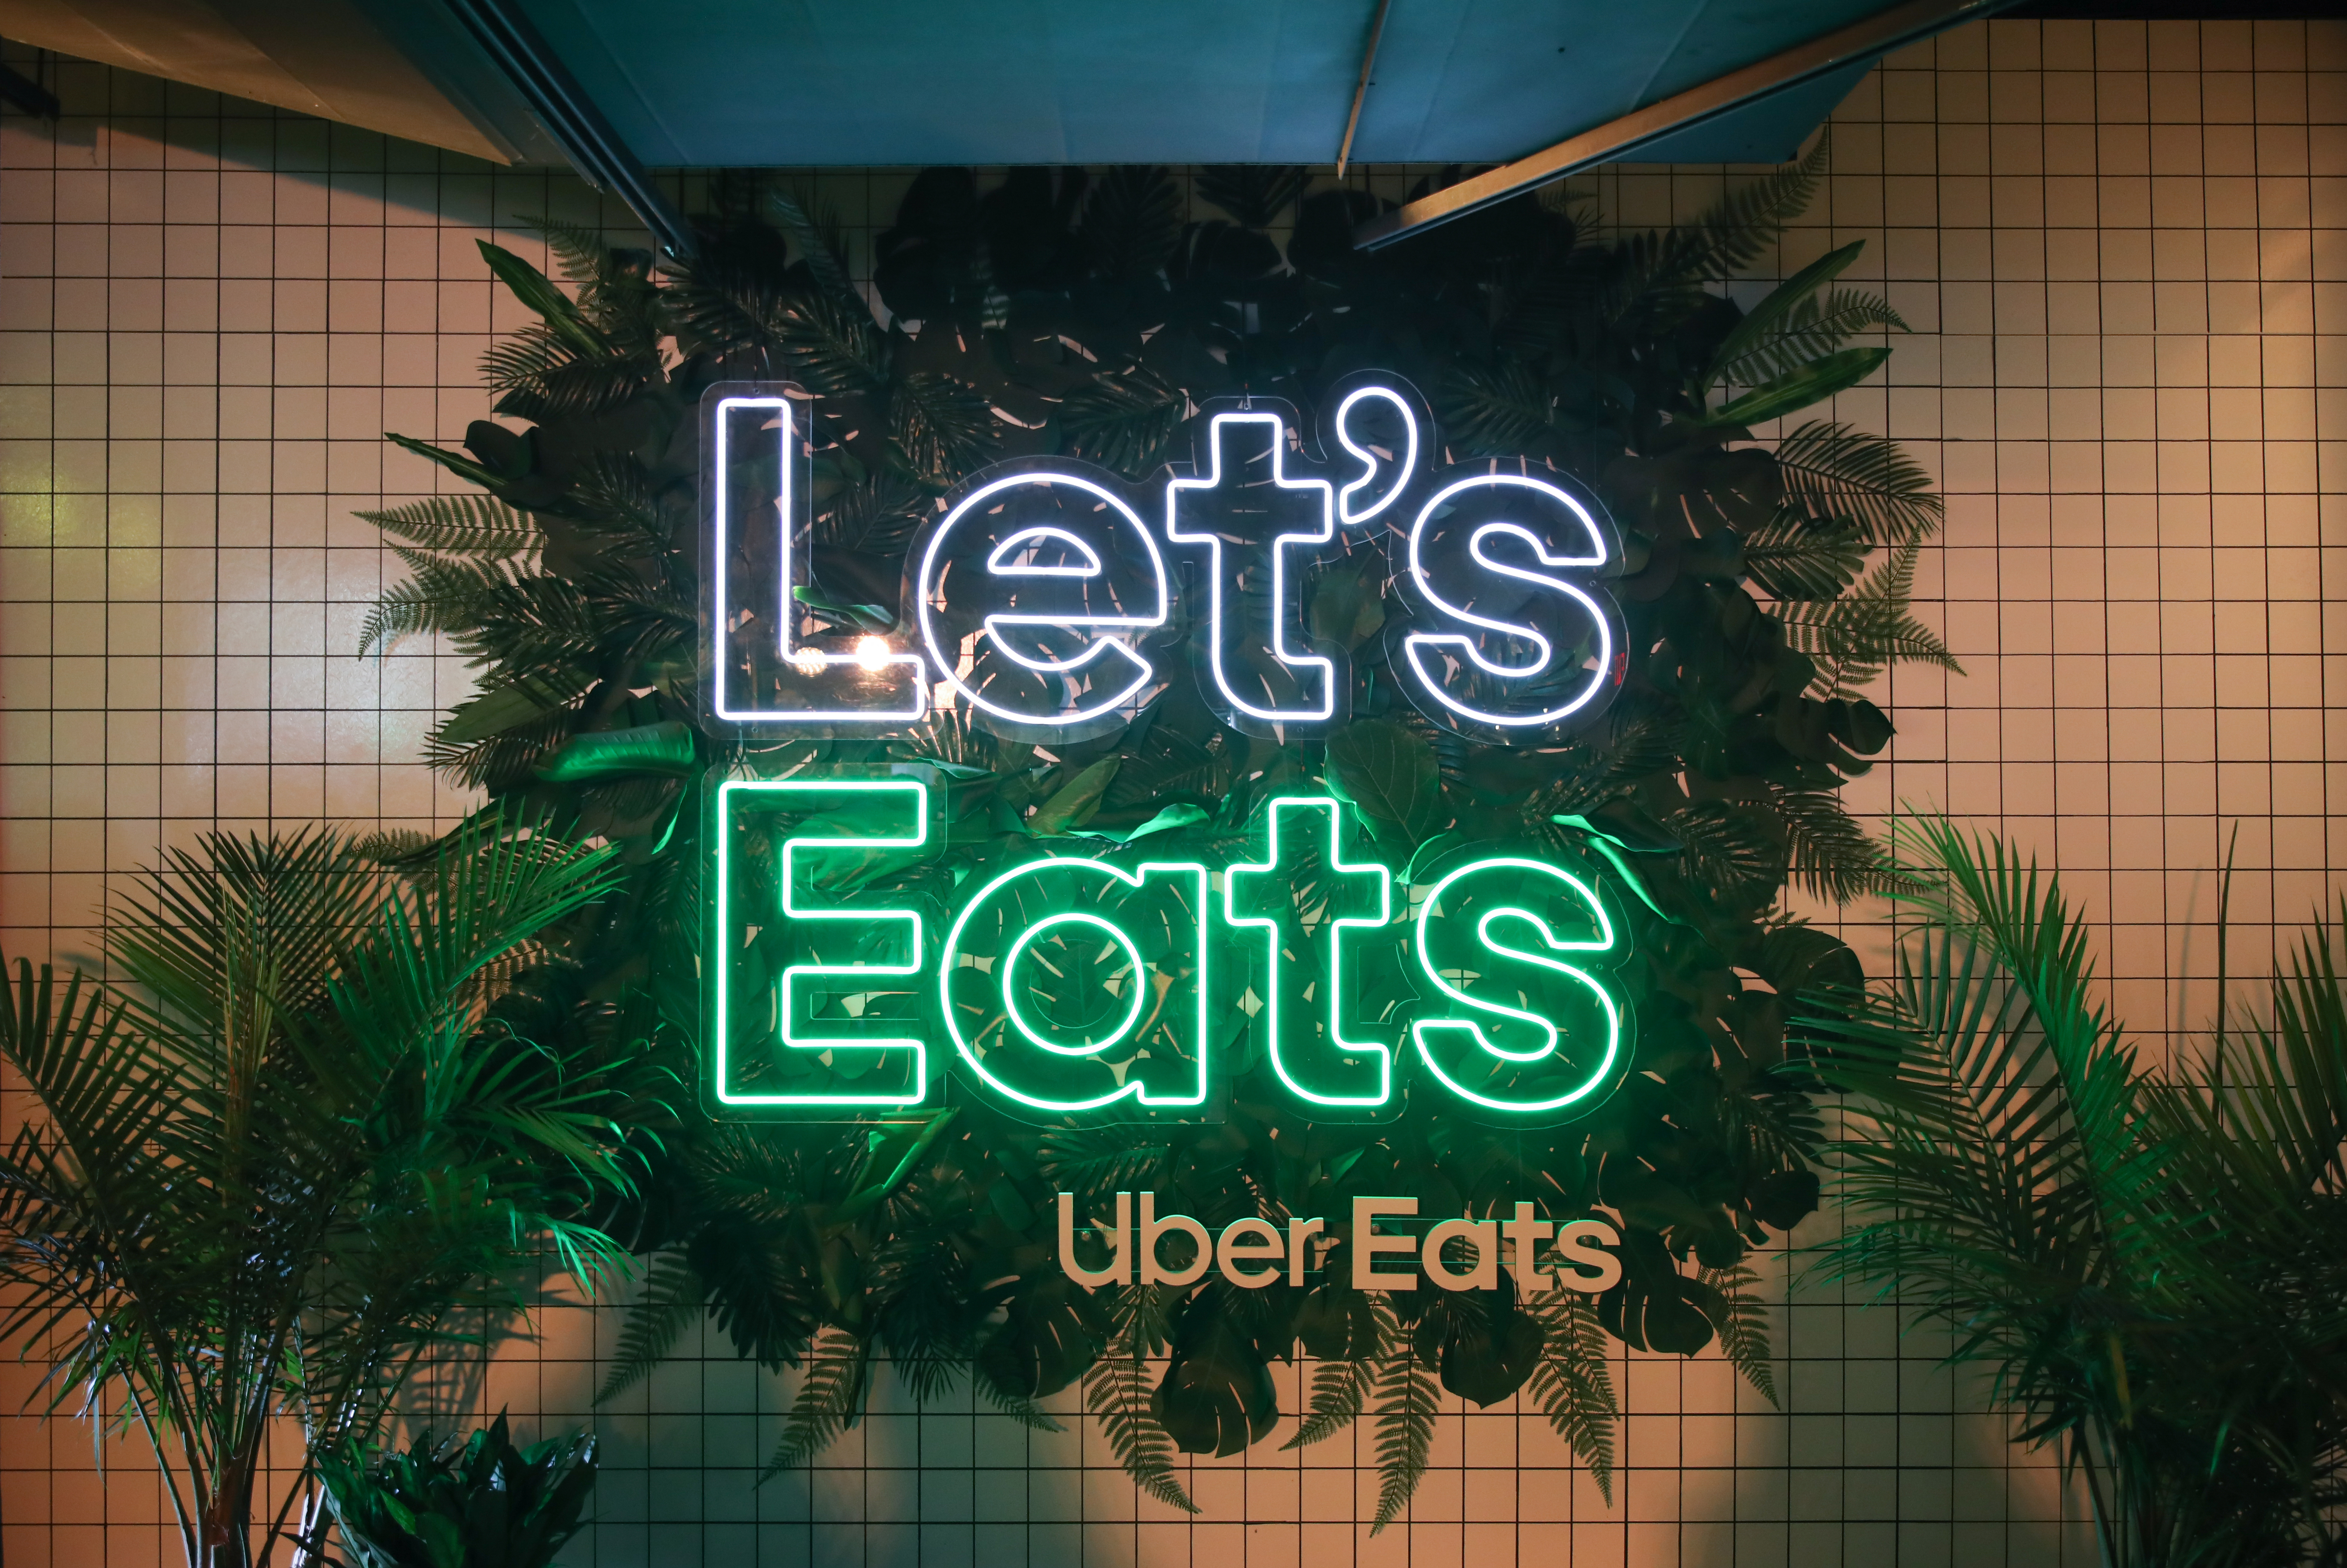 “Let’s Eats” neon sign by Uber Eats